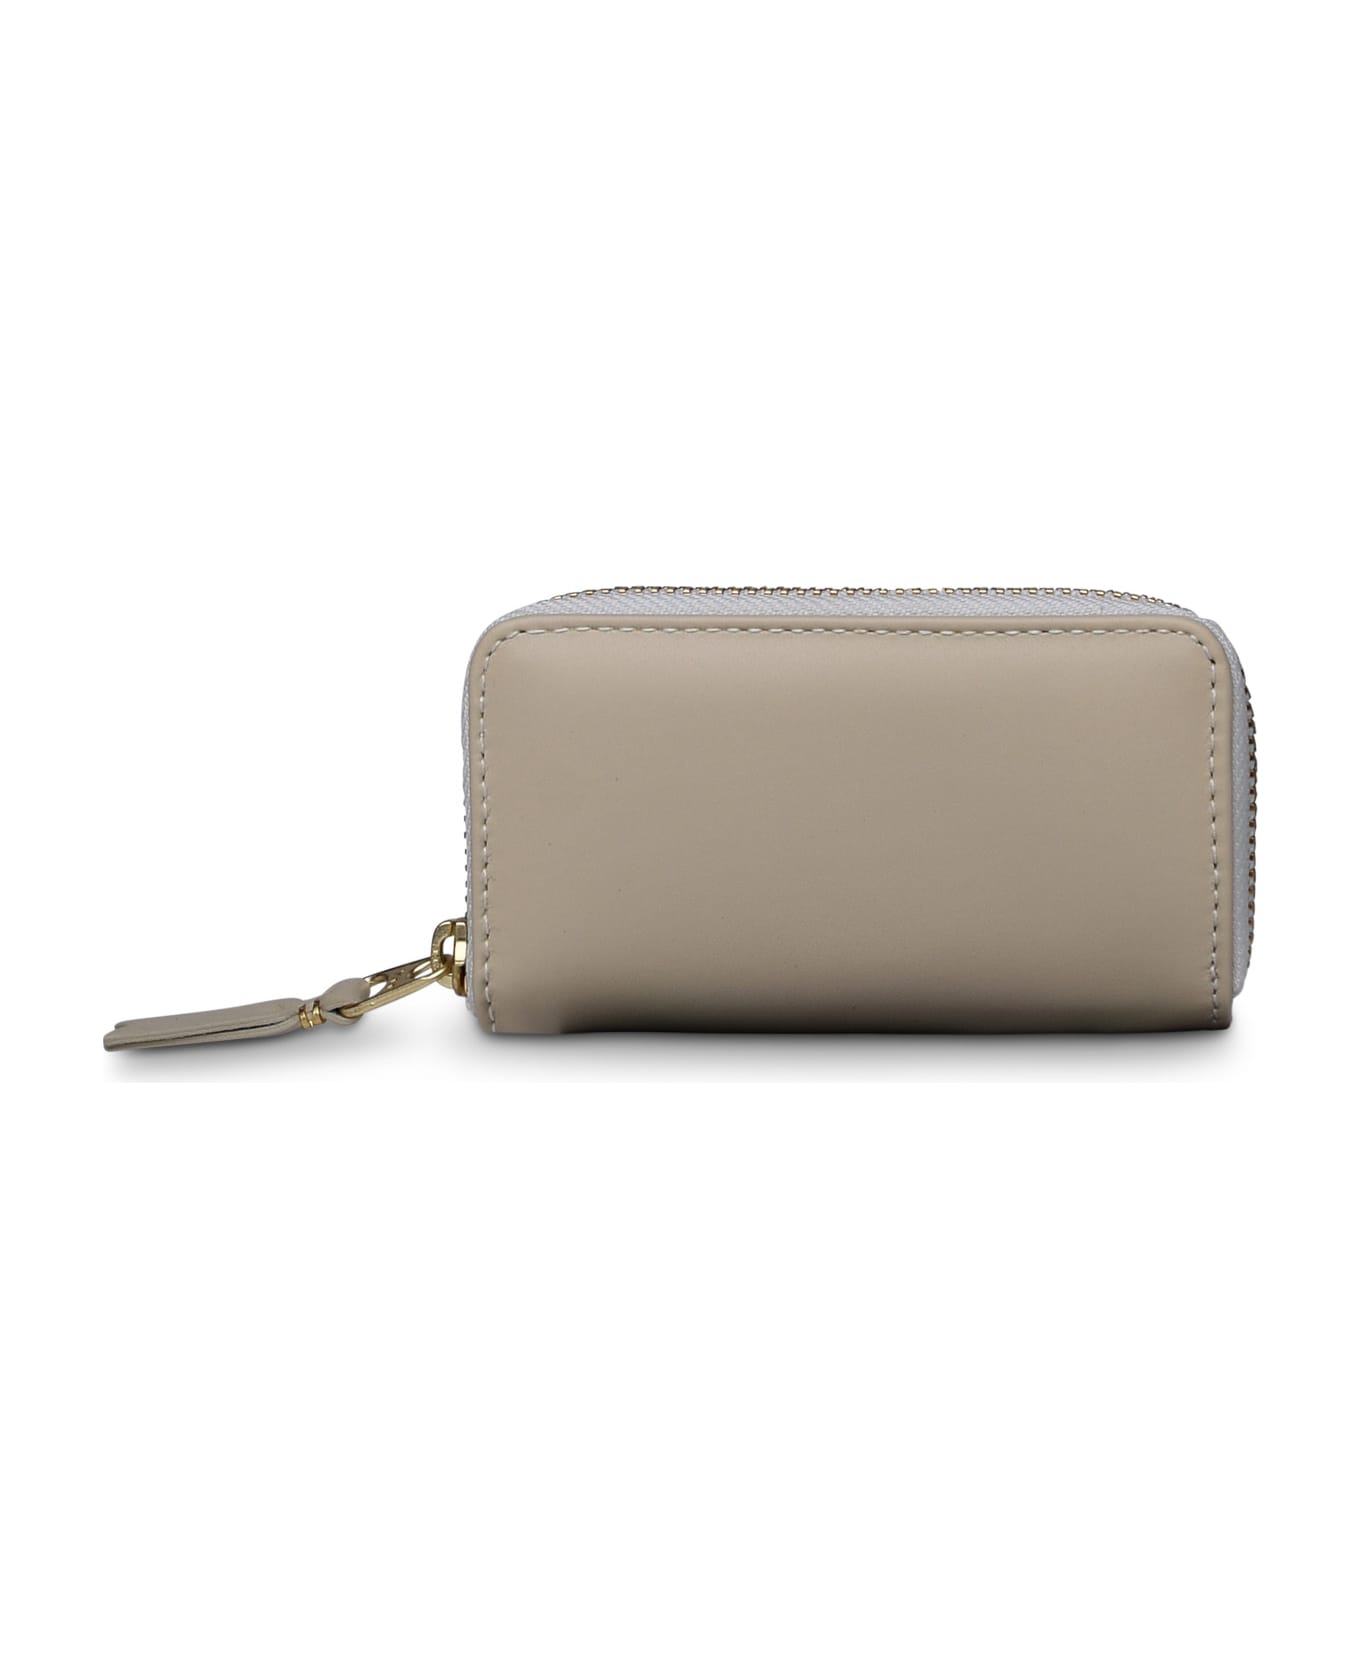 Comme des Garçons Wallet Ivory Leather Purse - Ivory クラッチバッグ